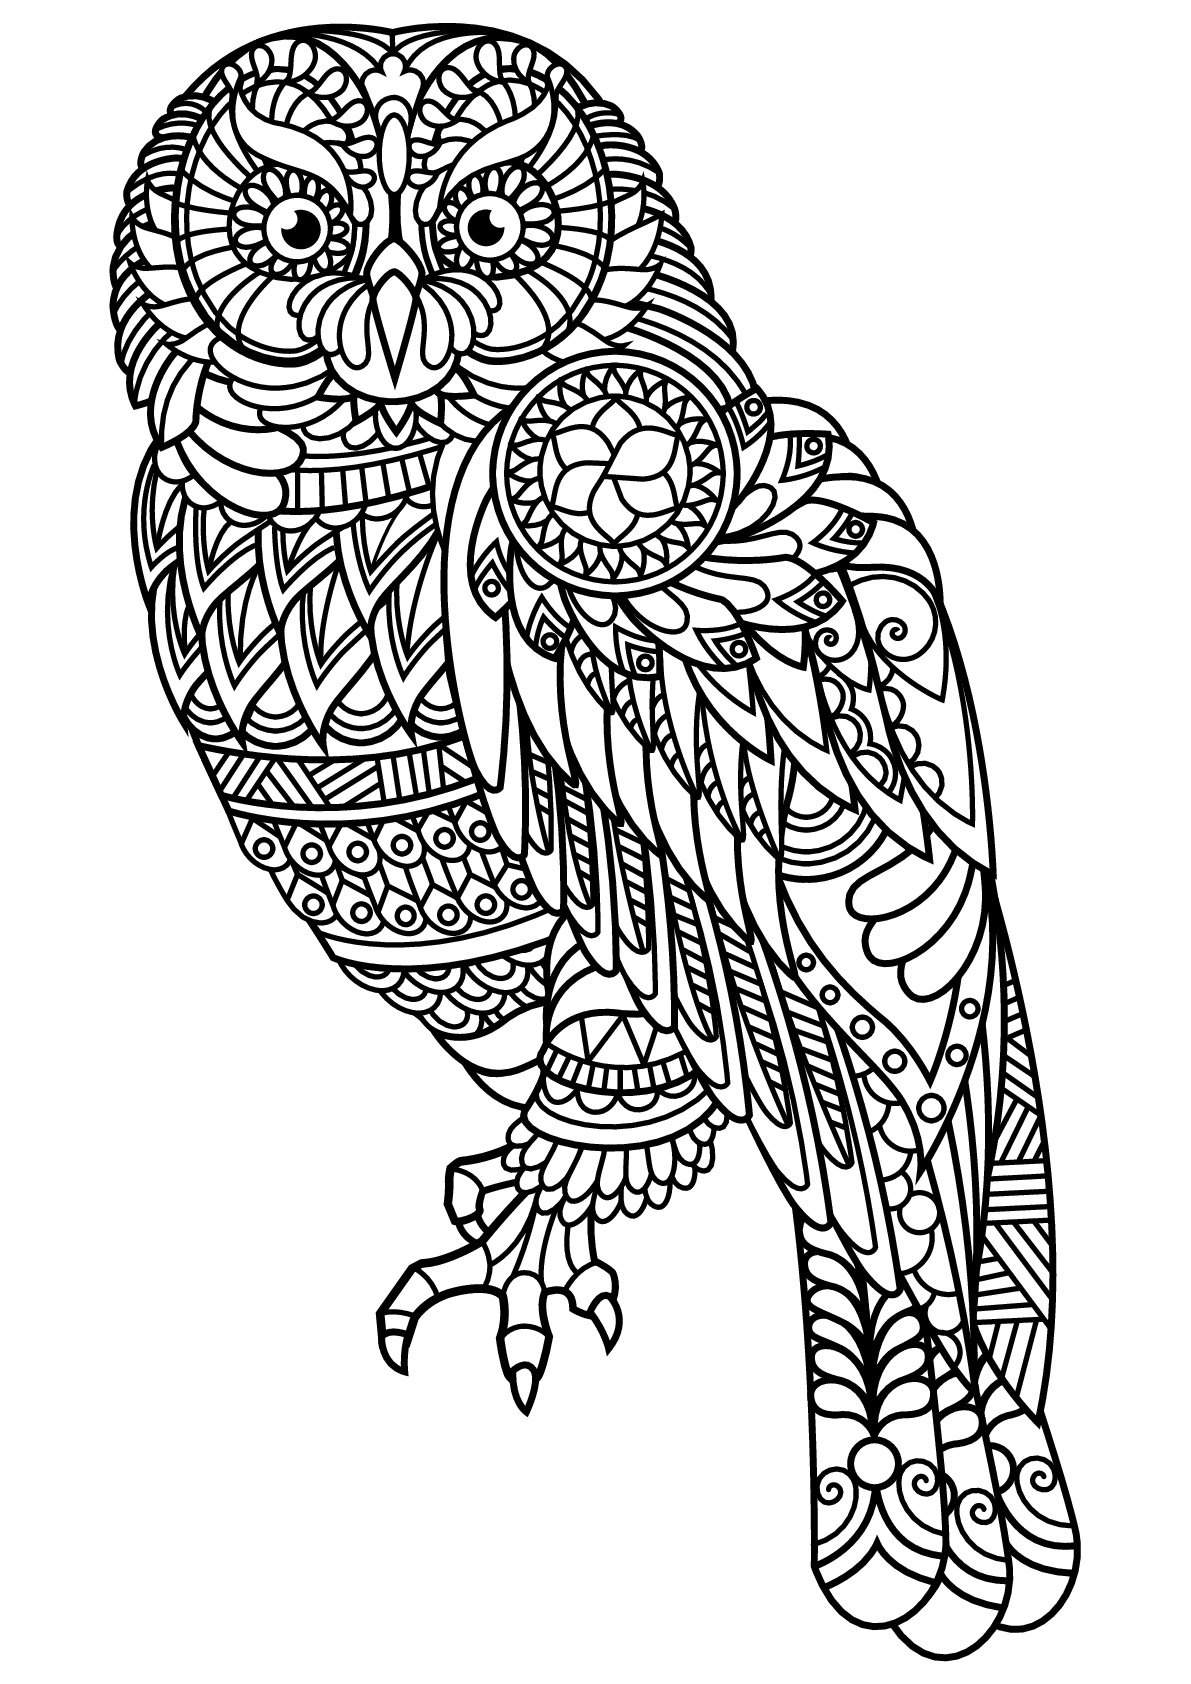 owl-with-beautiful-patterns-owls-adult-coloring-pages